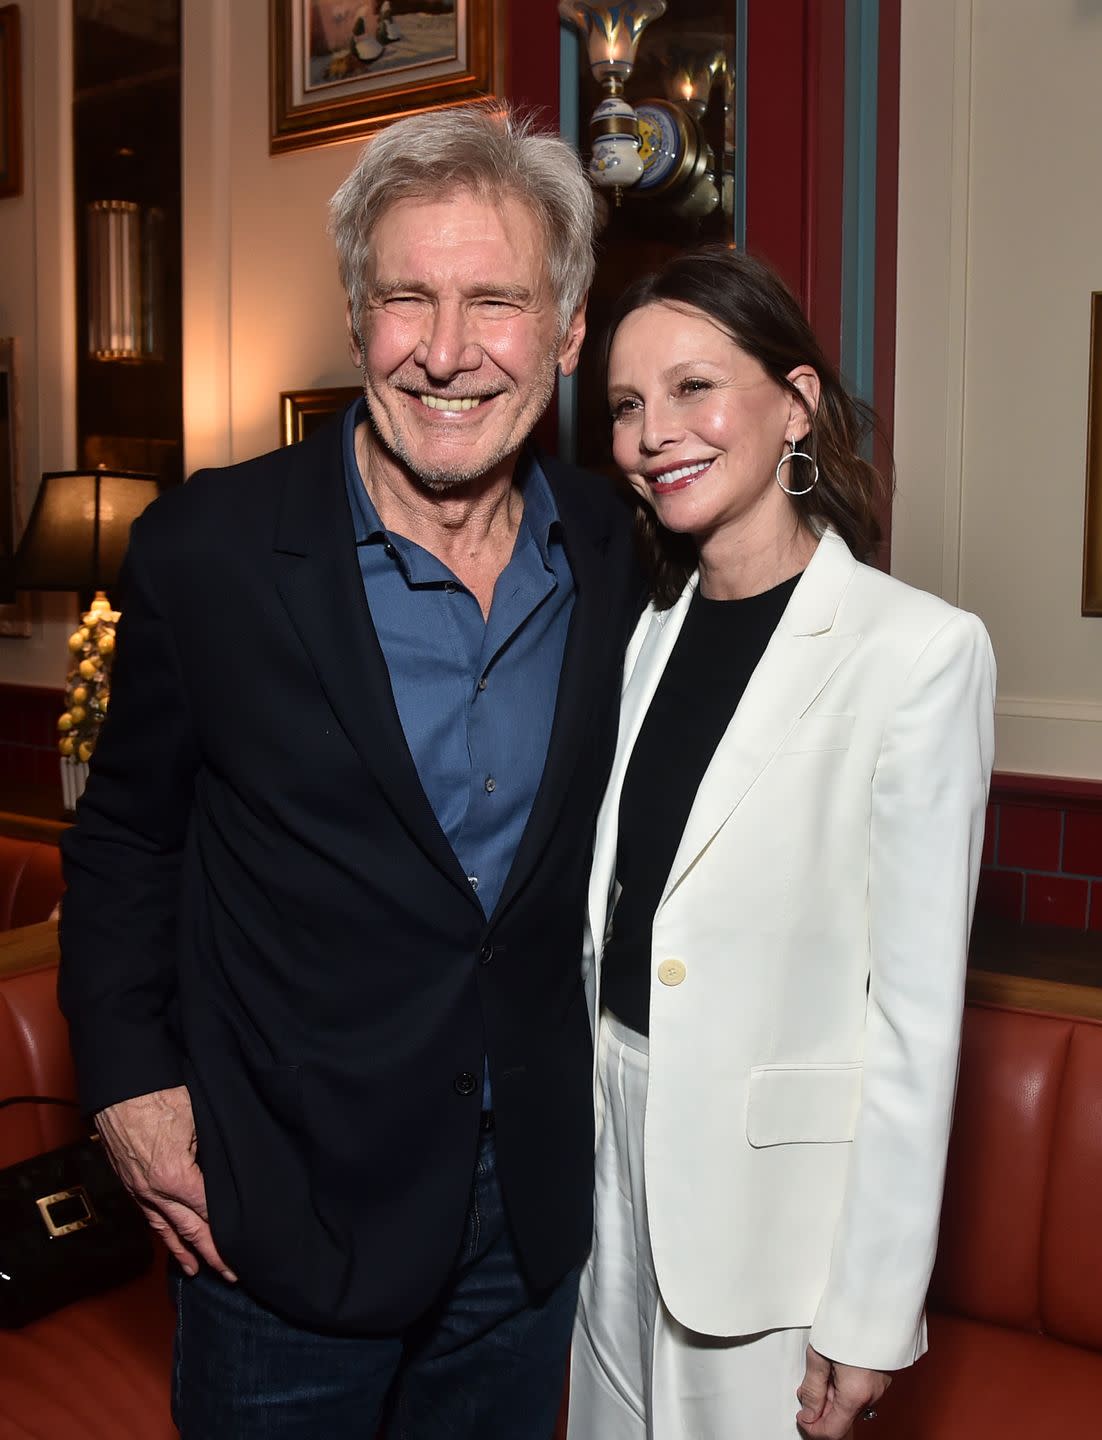 los angeles, california december 02 harrison ford and calista flockhart attend the 1923 la premiere screening after party on december 02, 2022 in los angeles, california photo by alberto e rodriguezgetty images for paramount